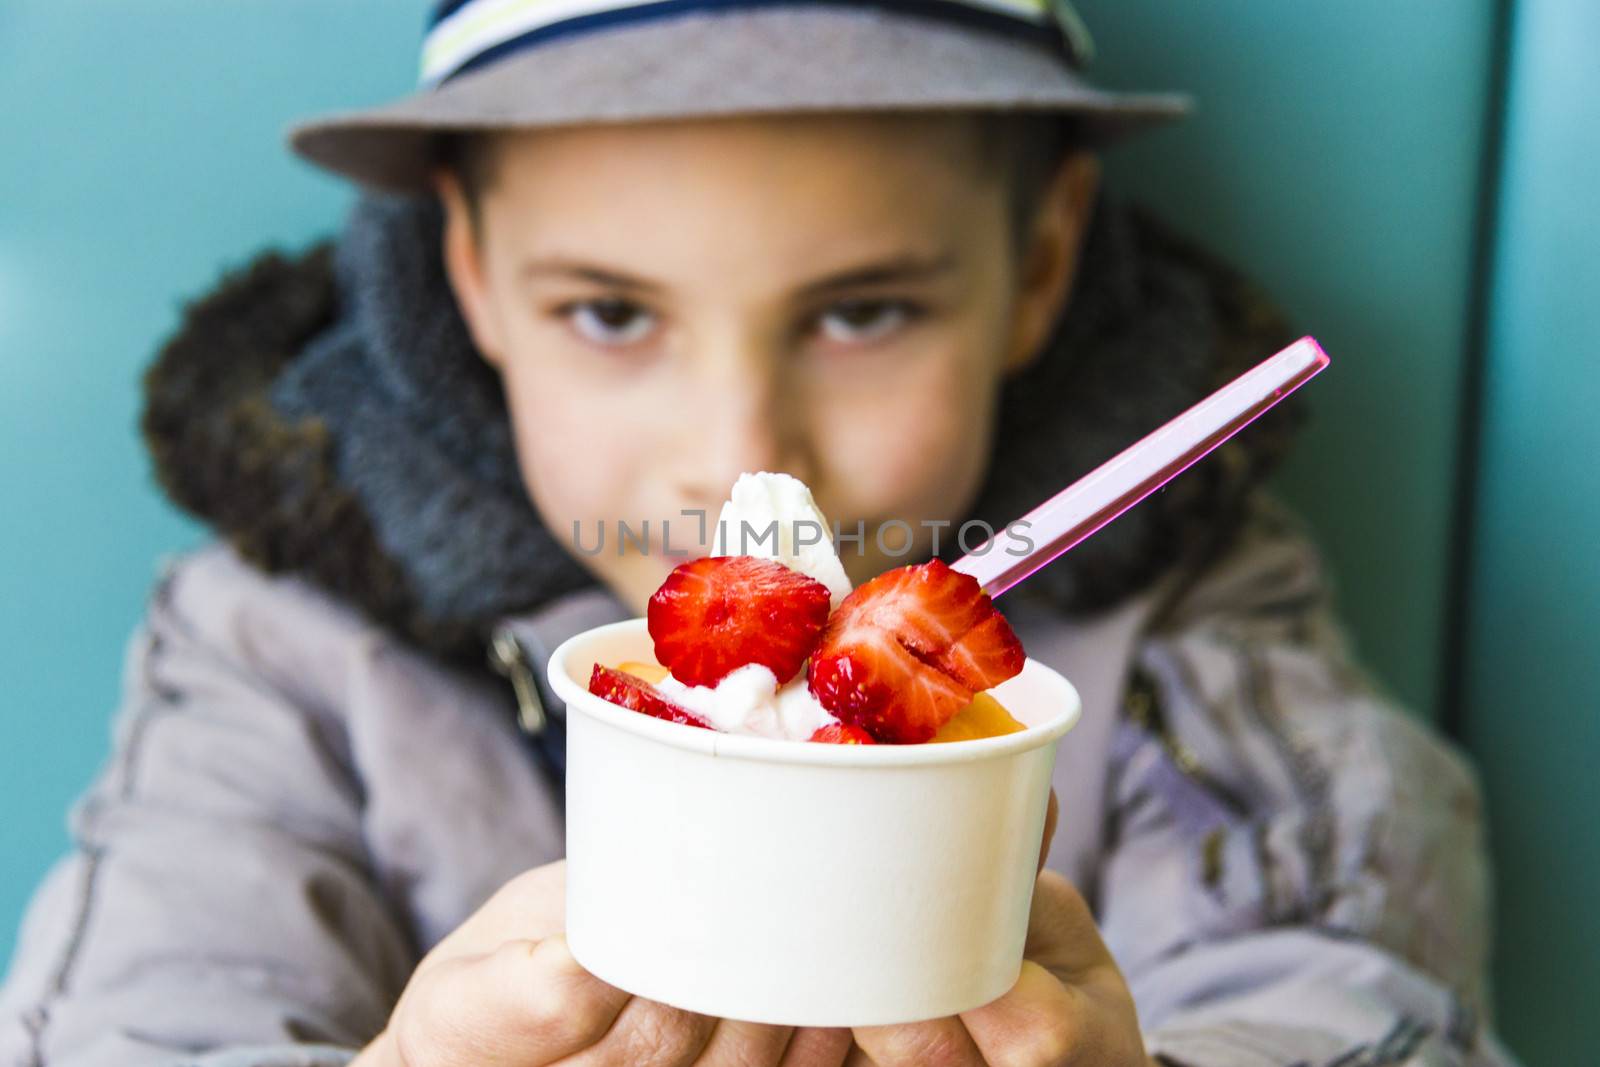 Cute teenage boy offering ice cream with strawberry and melon topping